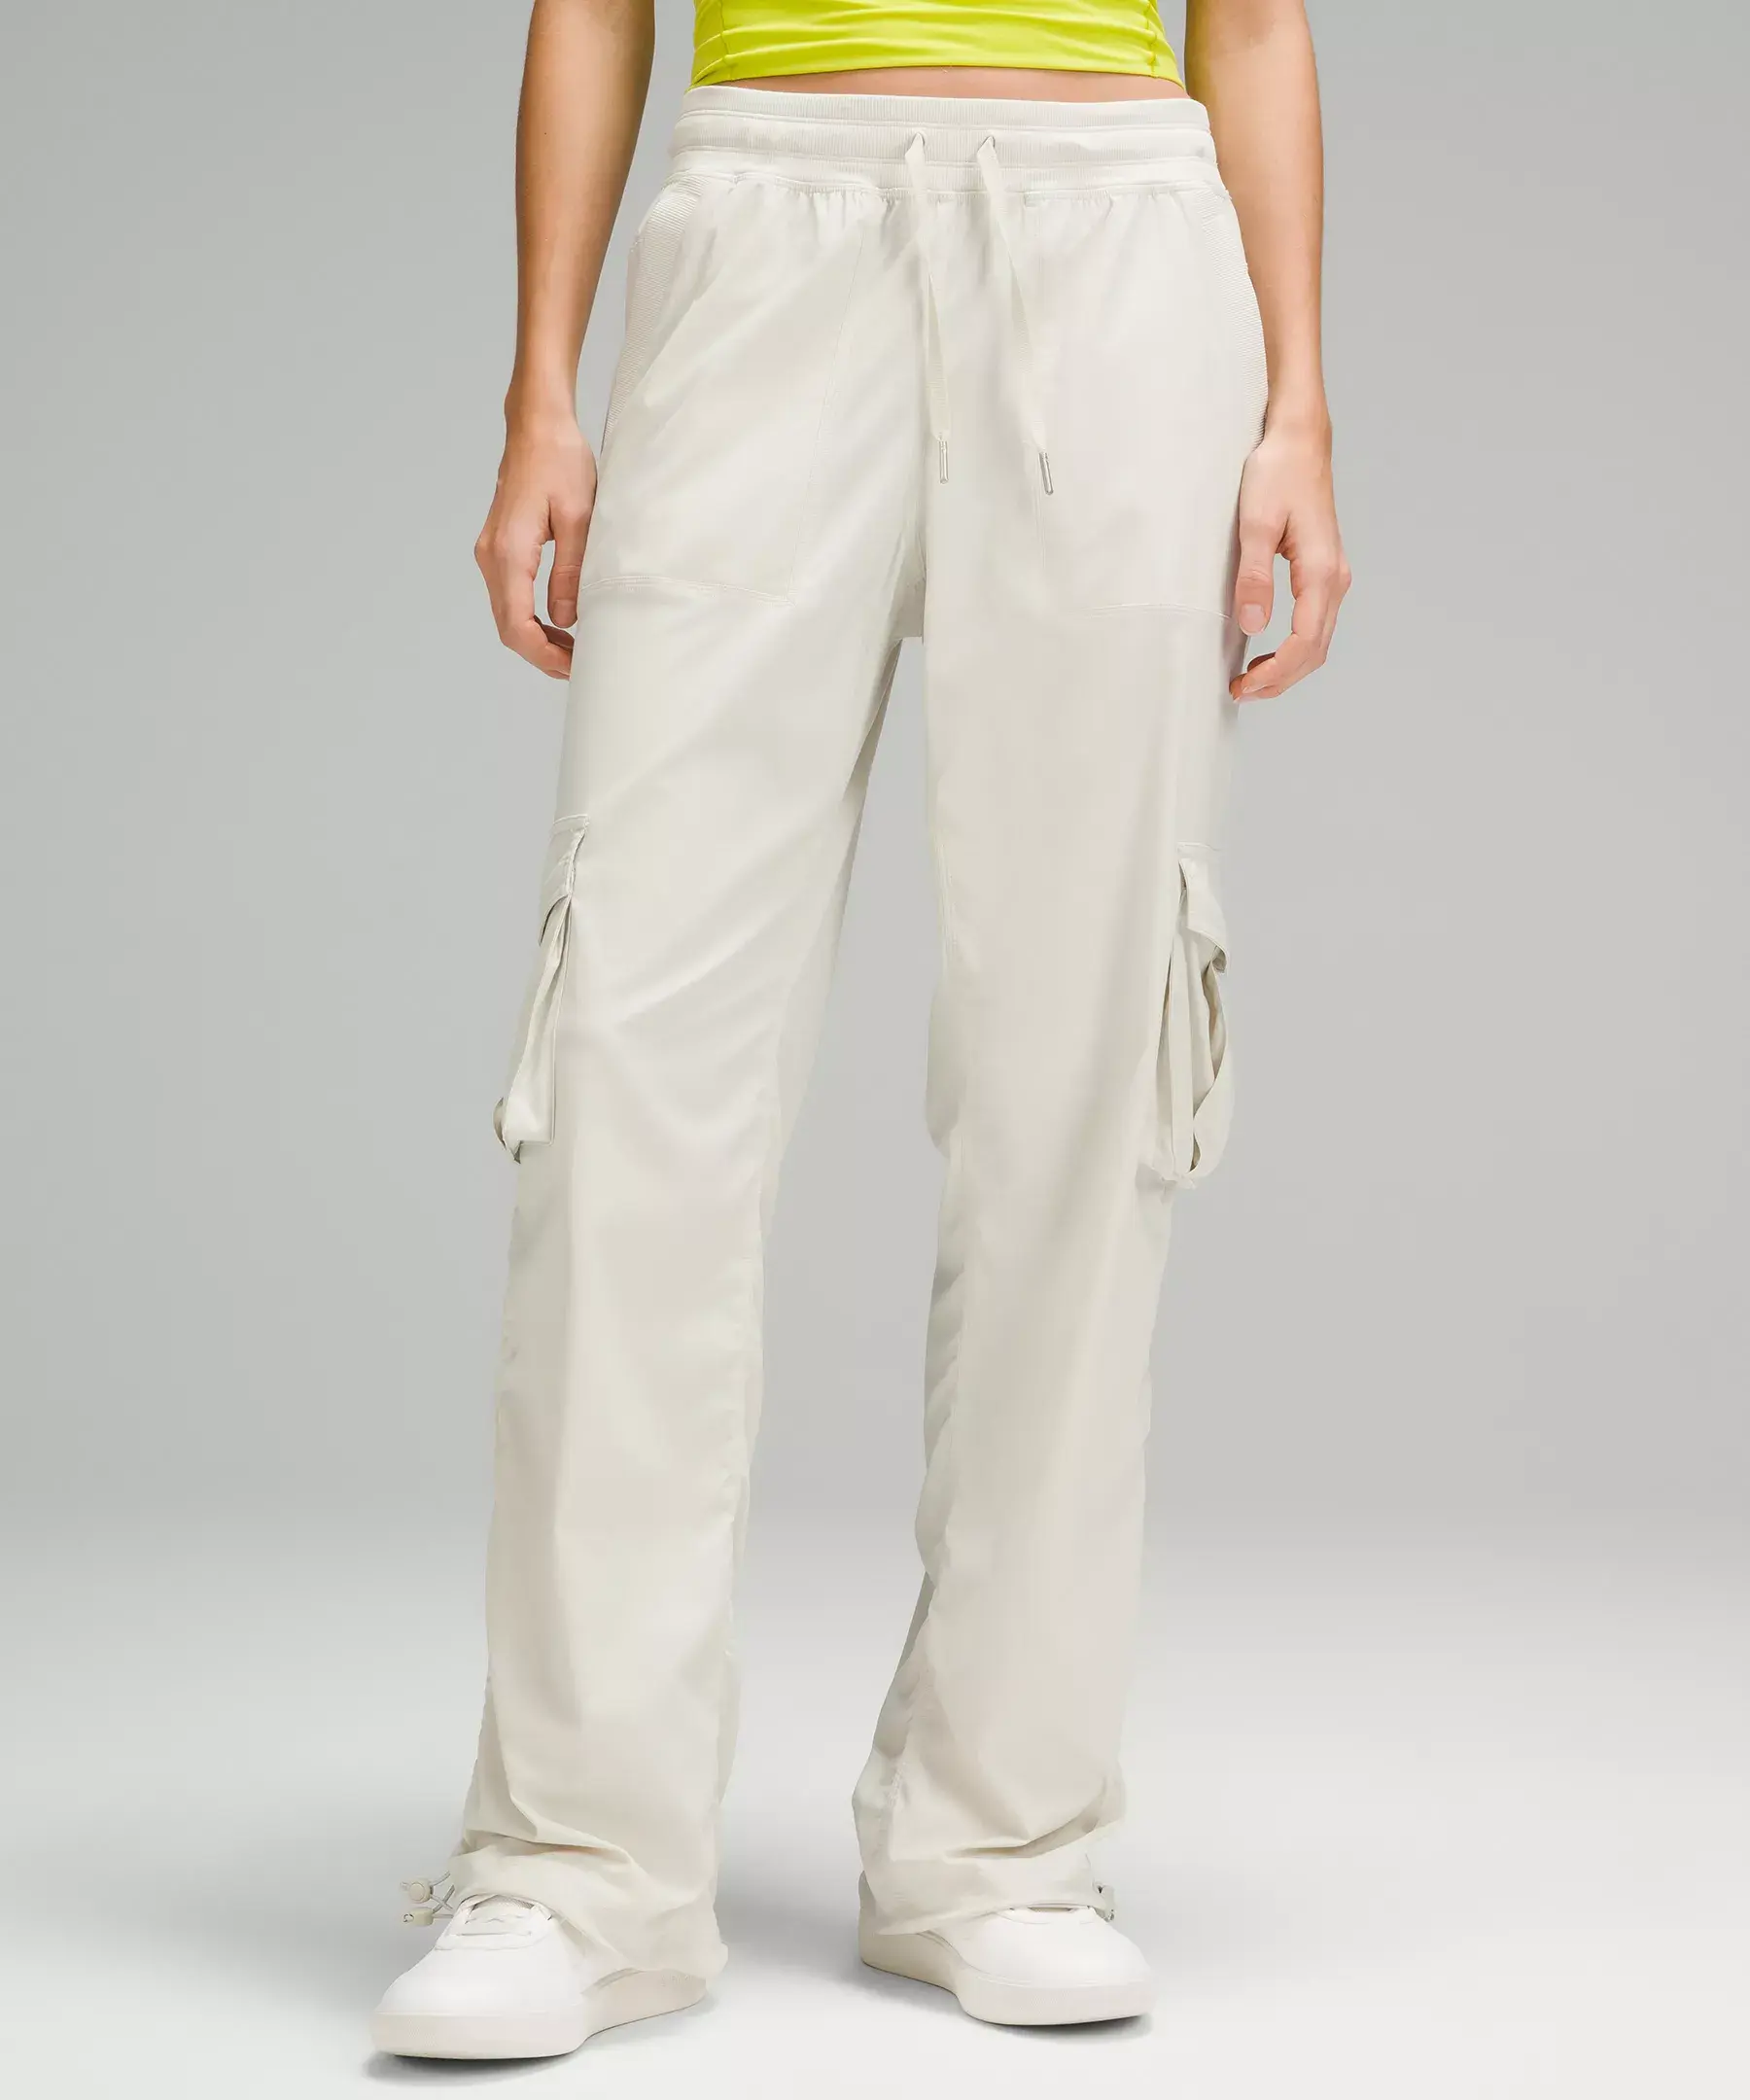 Lululemon Dance Studio Relaxed-Fit Mid-Rise Cargo Pant. 1